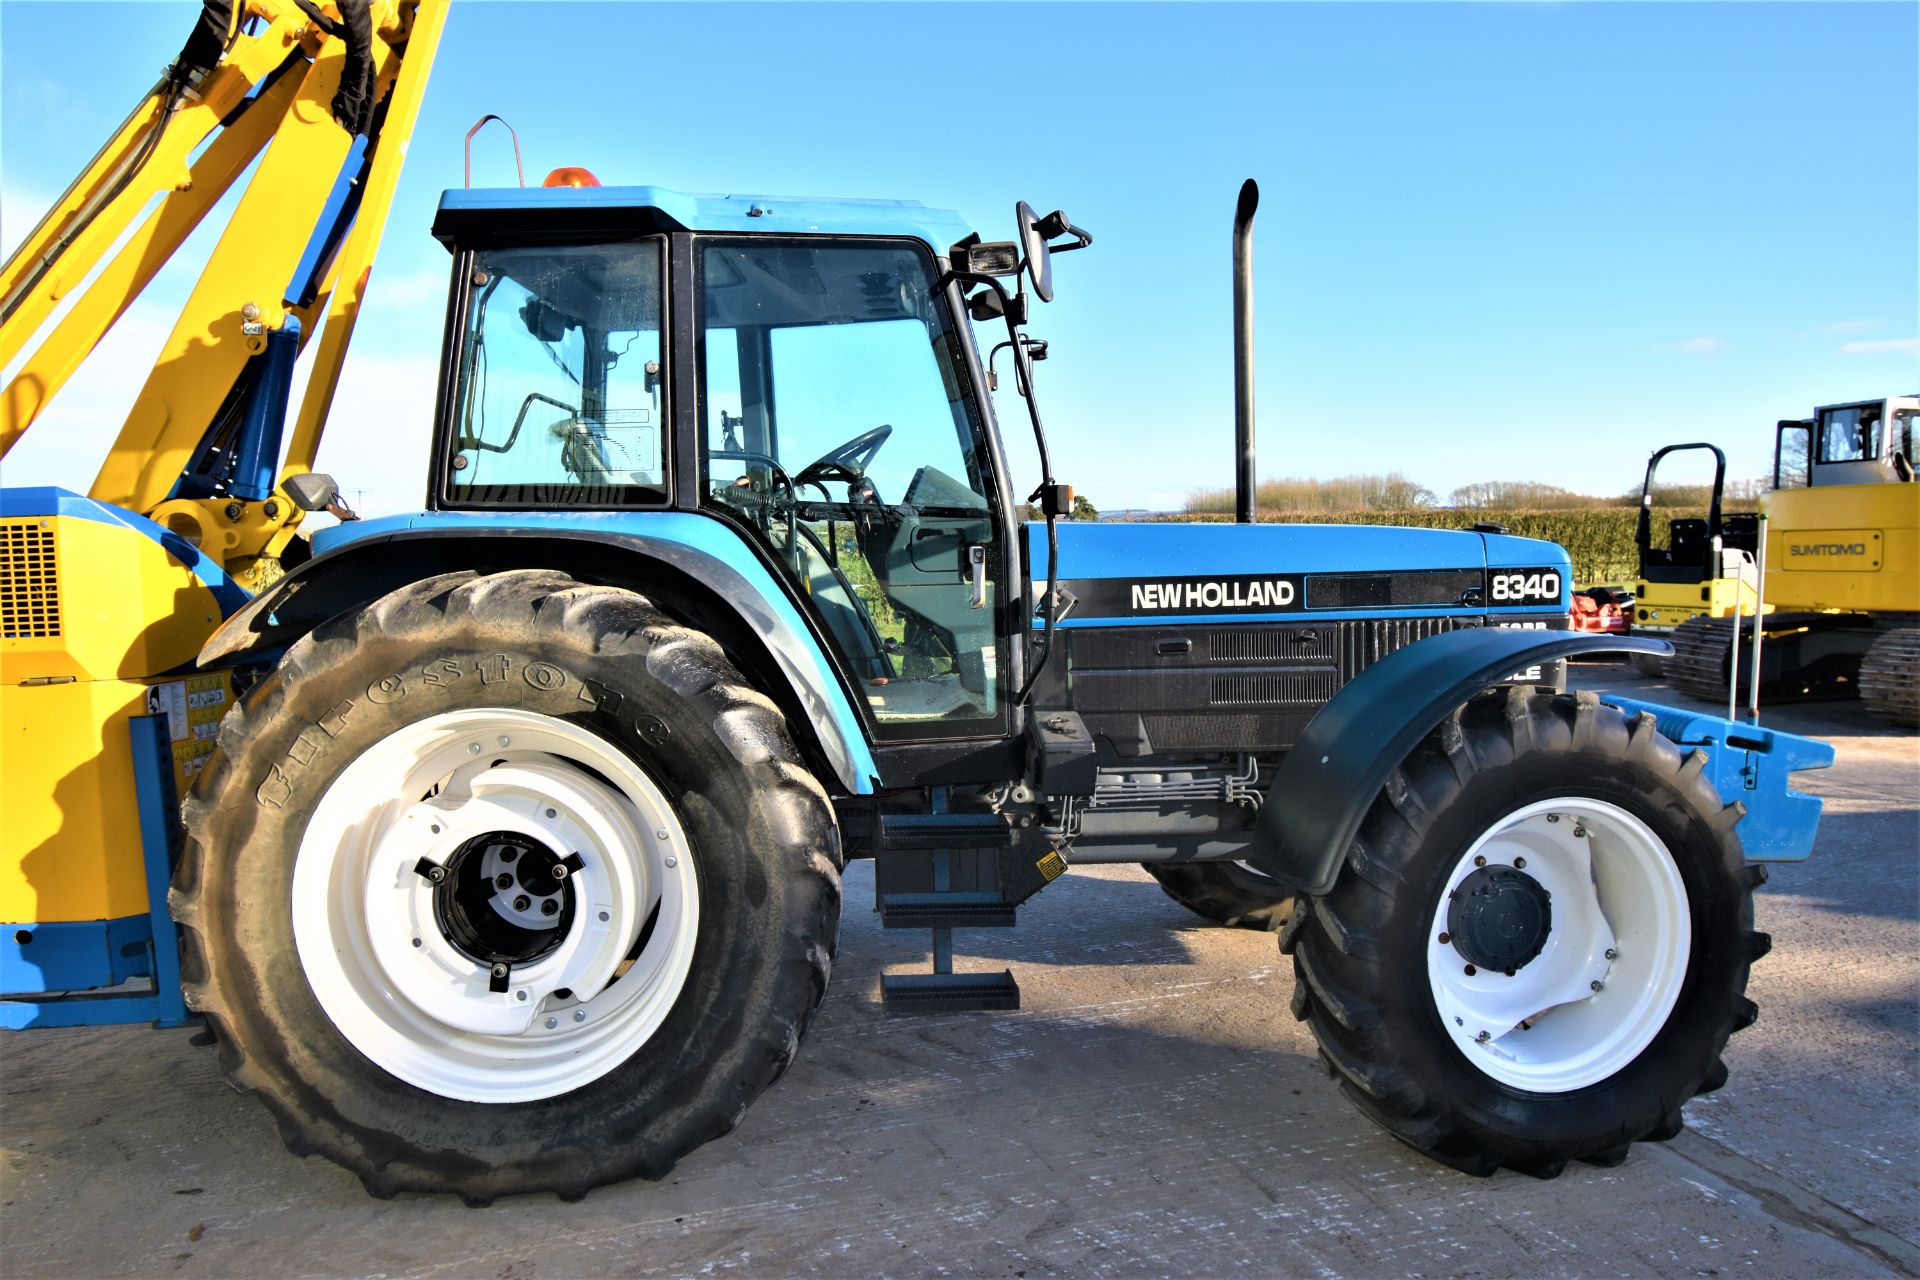 New-Holland / Ford 8340 sle - Image 8 of 12